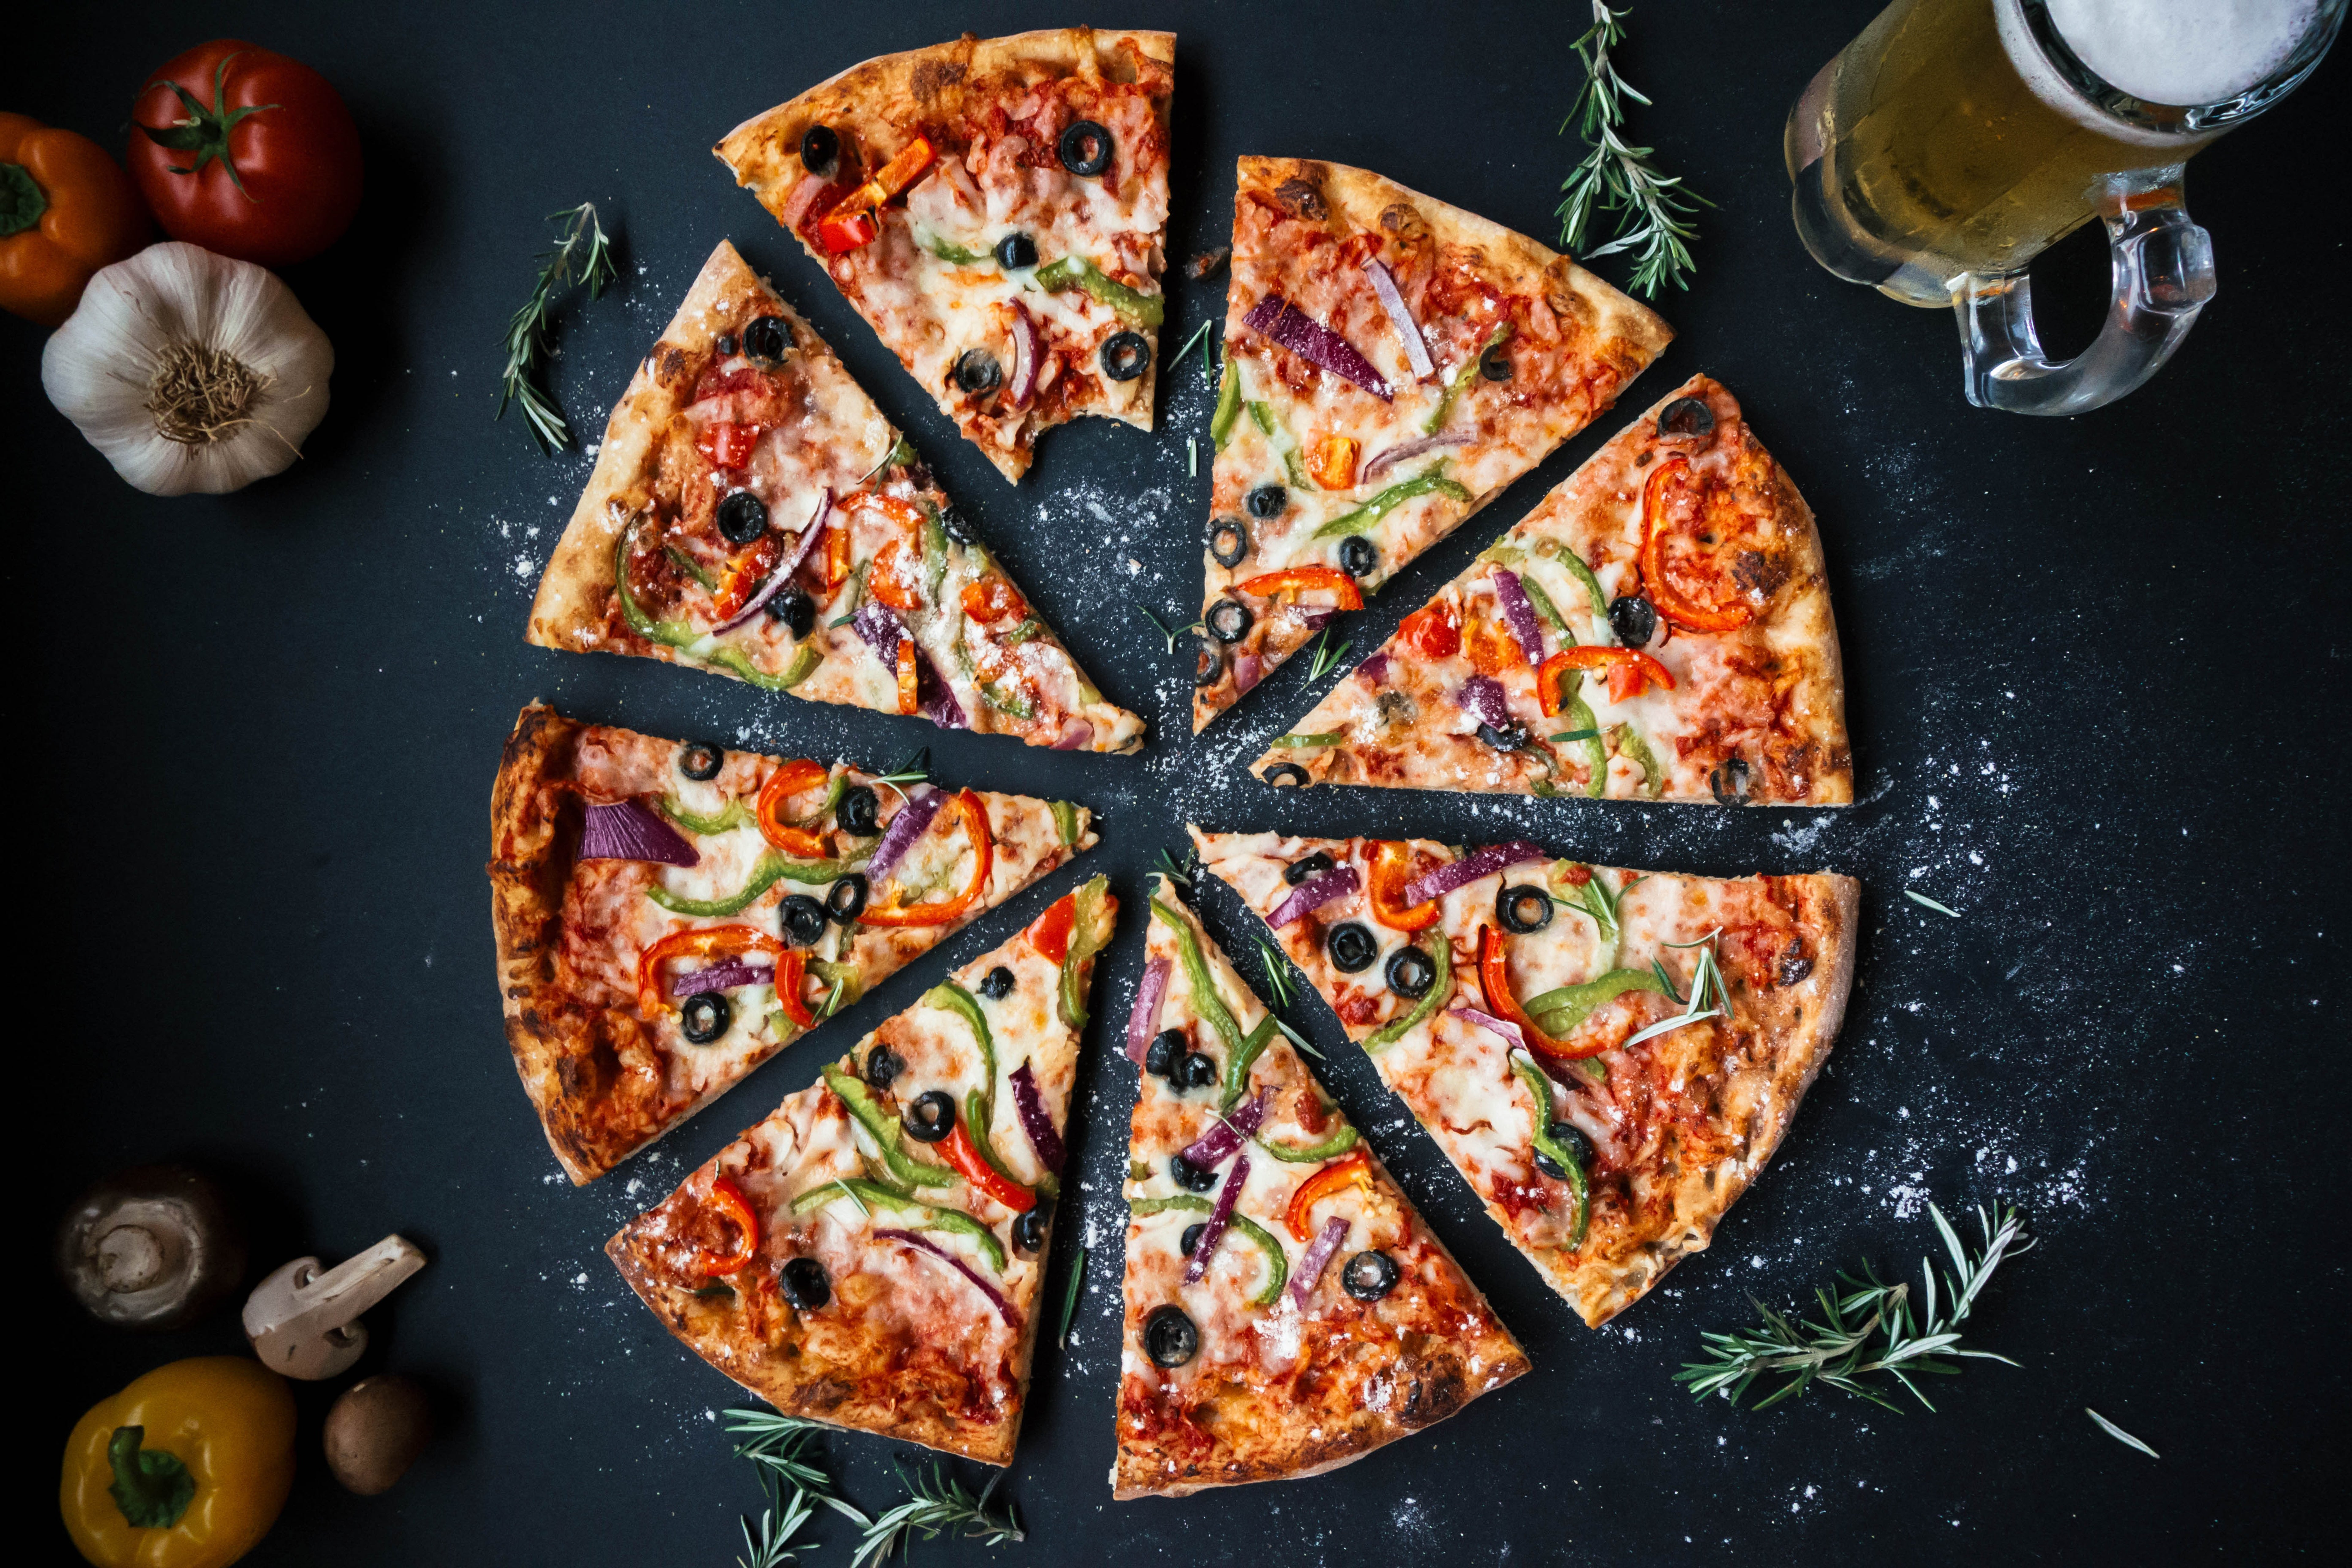 This Pizza Stock Has A Better 1-Year Return Than Amazon, Snap, Plug Power And Starbucks